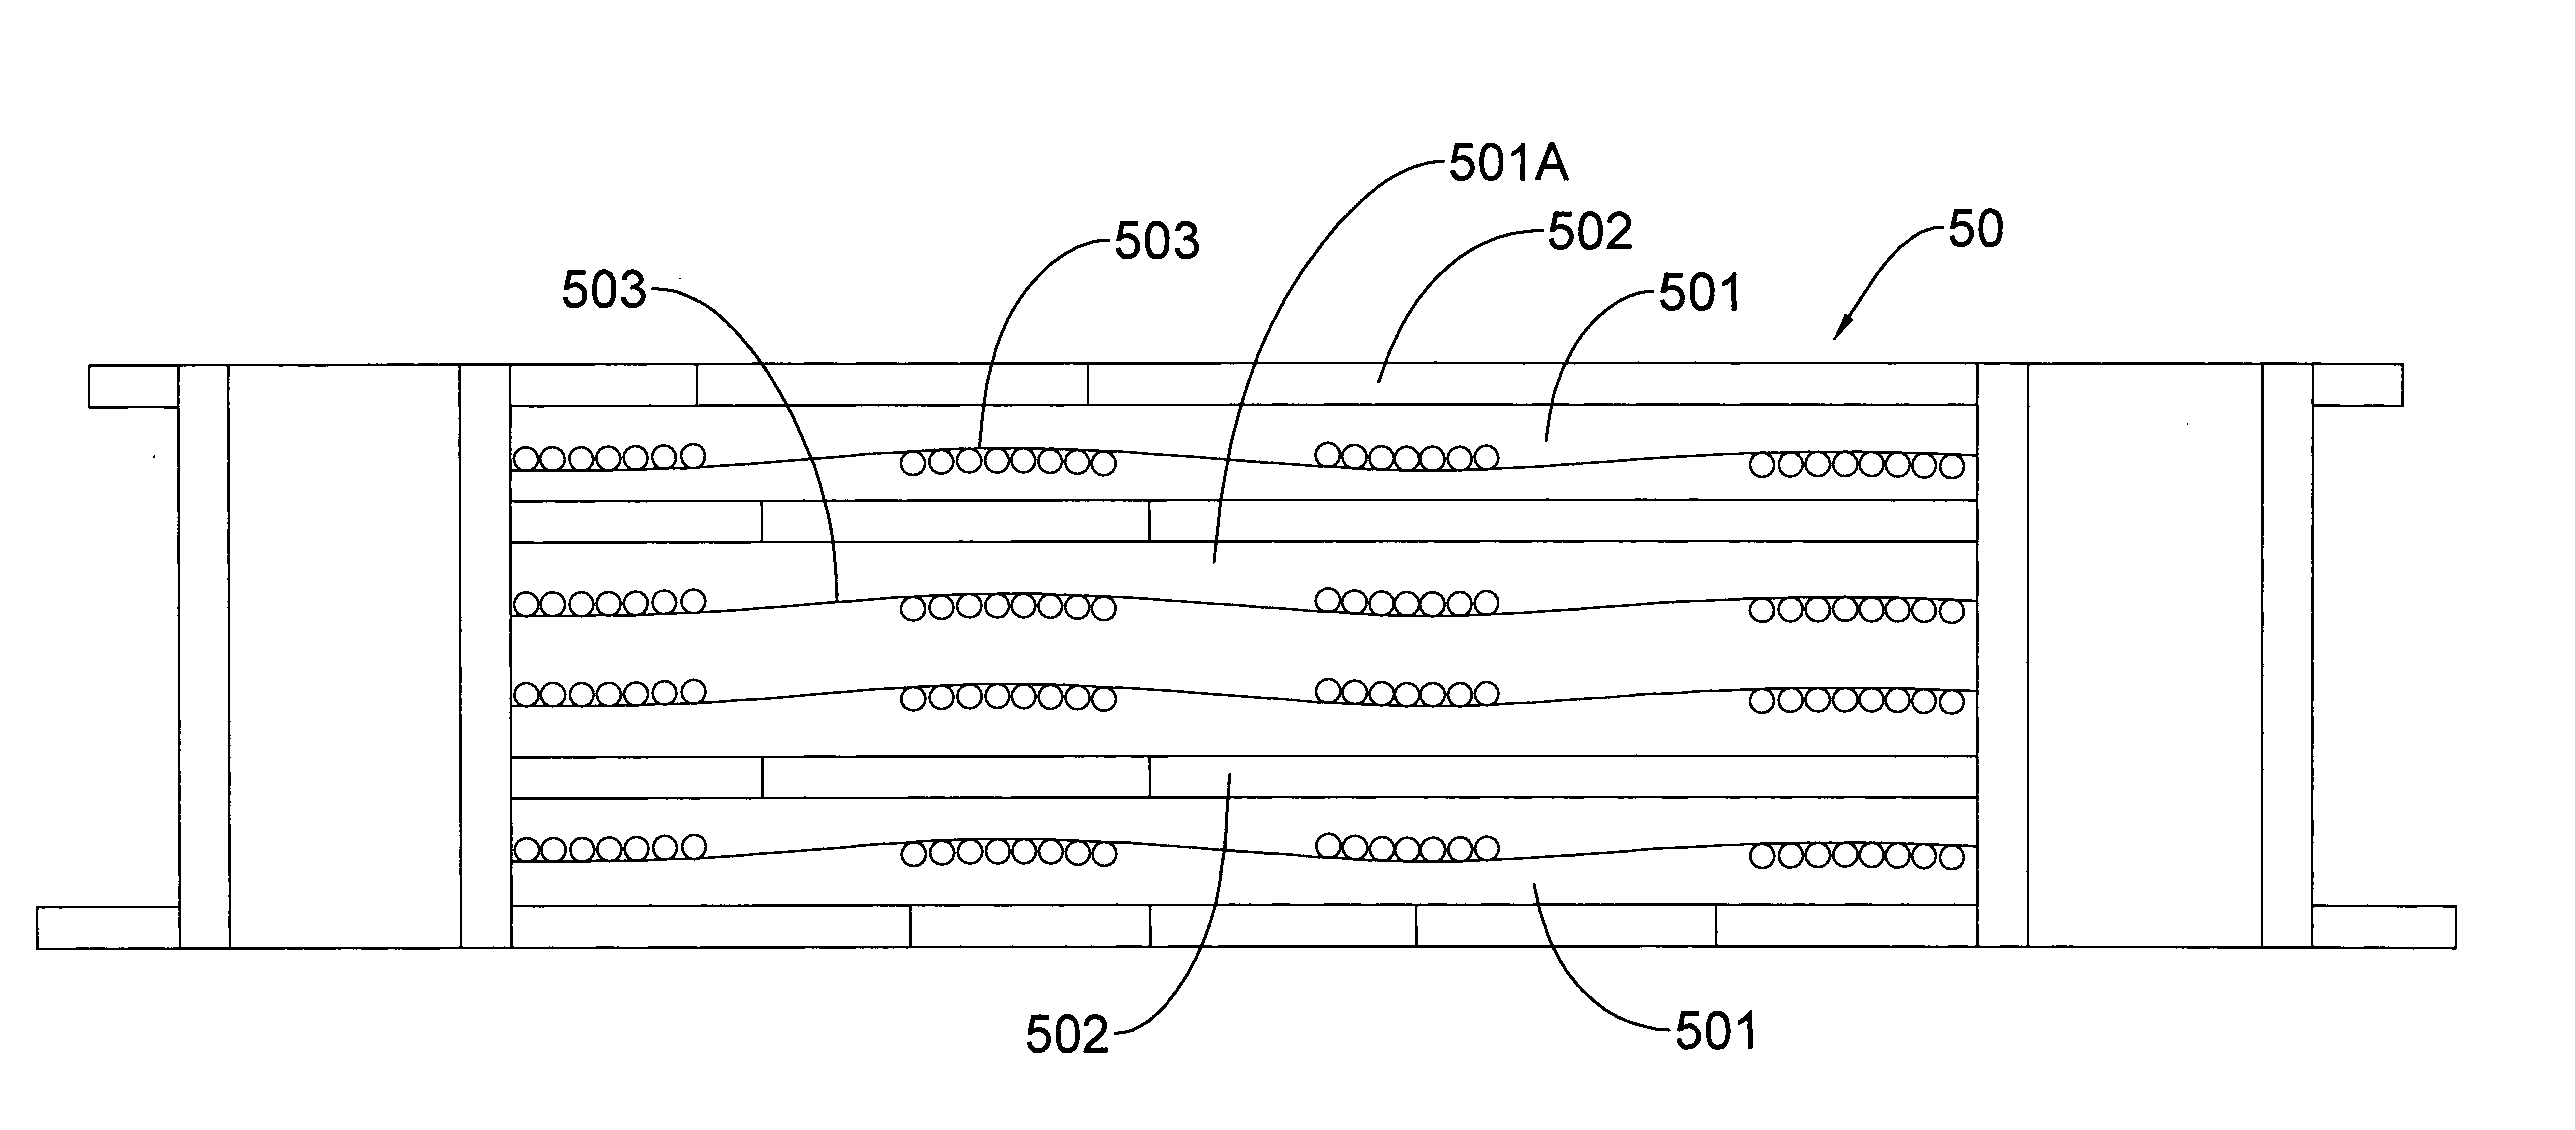 Screen control module of a mobile electronic device and controller thereof